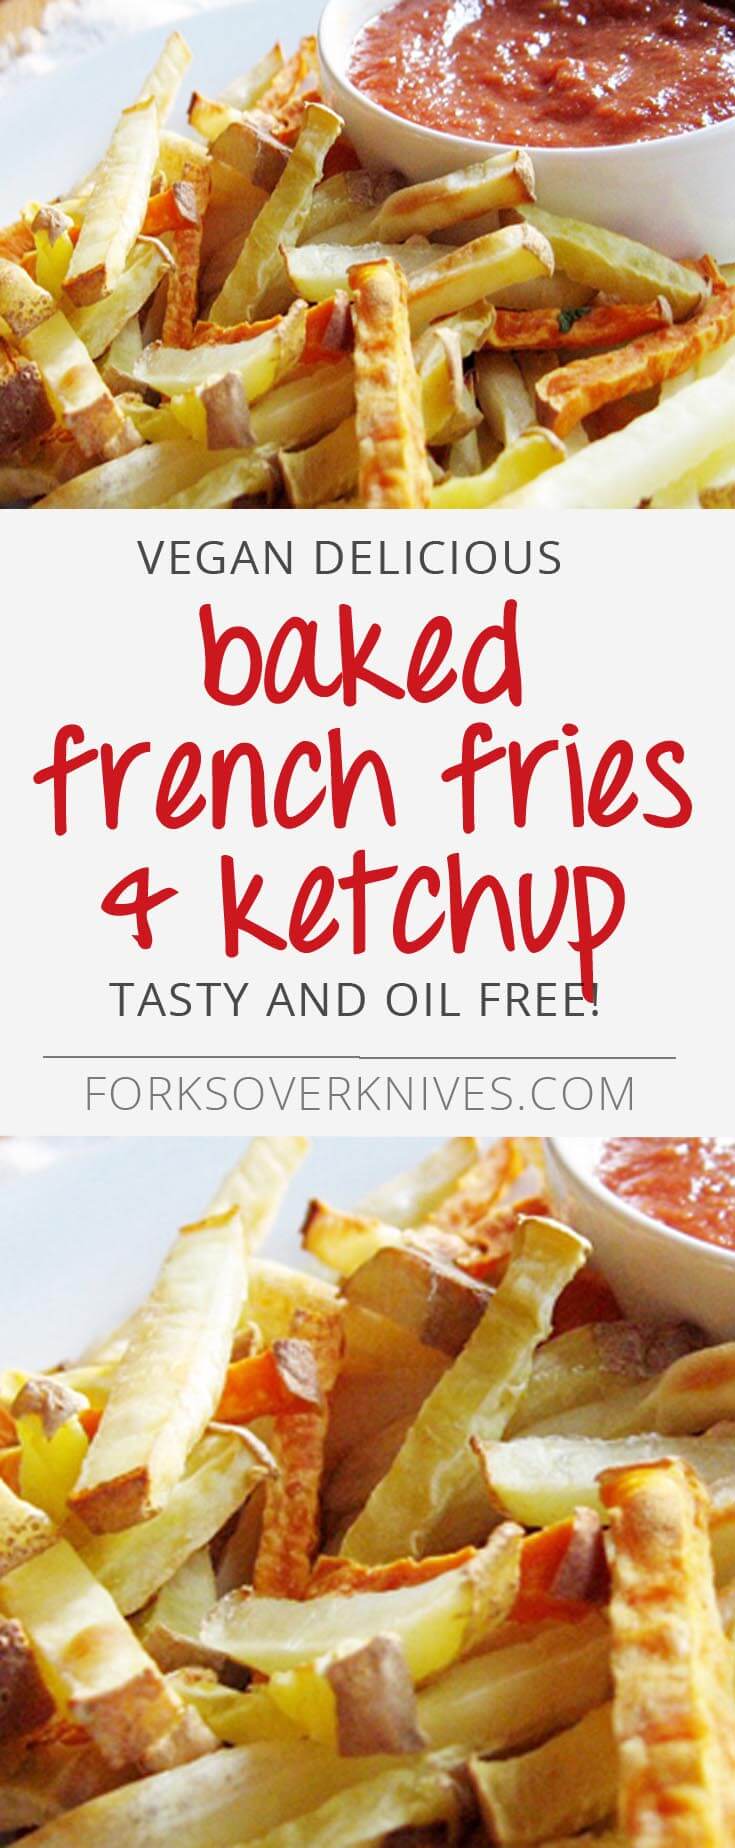 Baked French Fries & Ketchup - Plant-Based Vegan Recipe